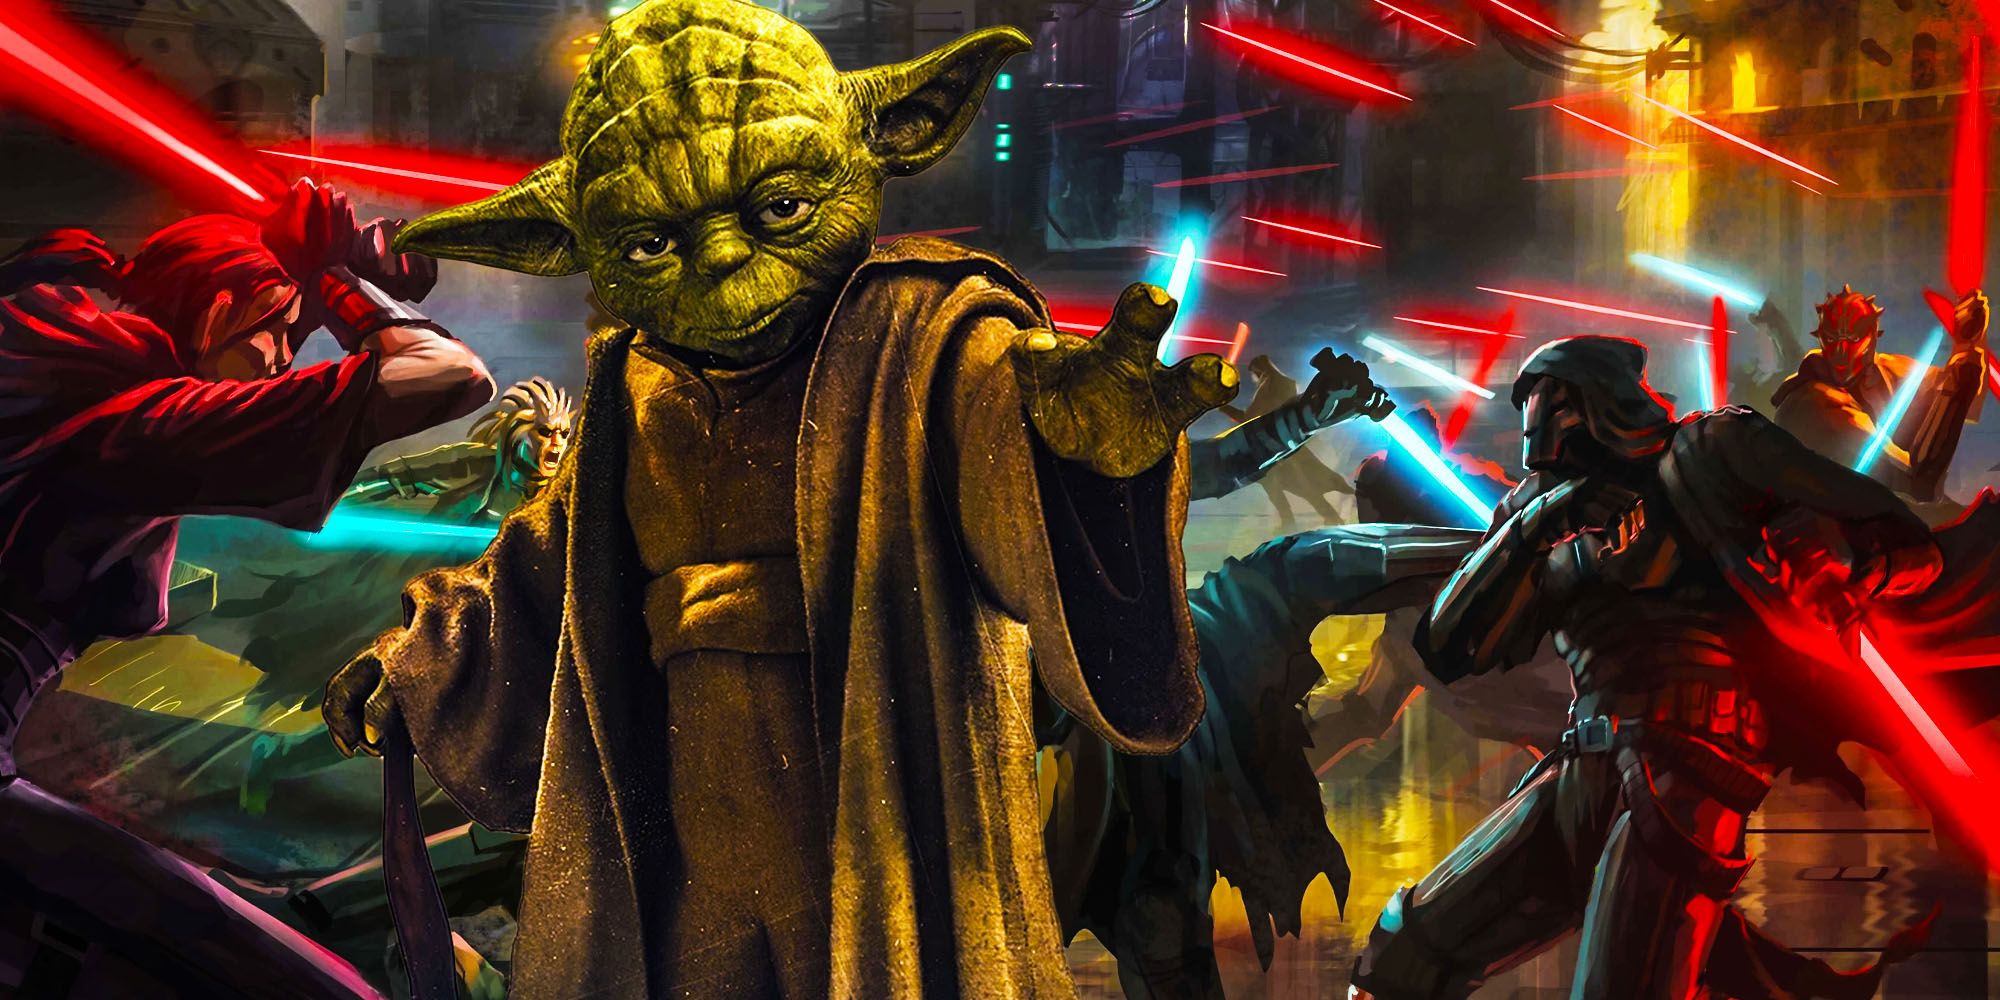 Star wars wrong about jedi sith war according to george lucas yoda